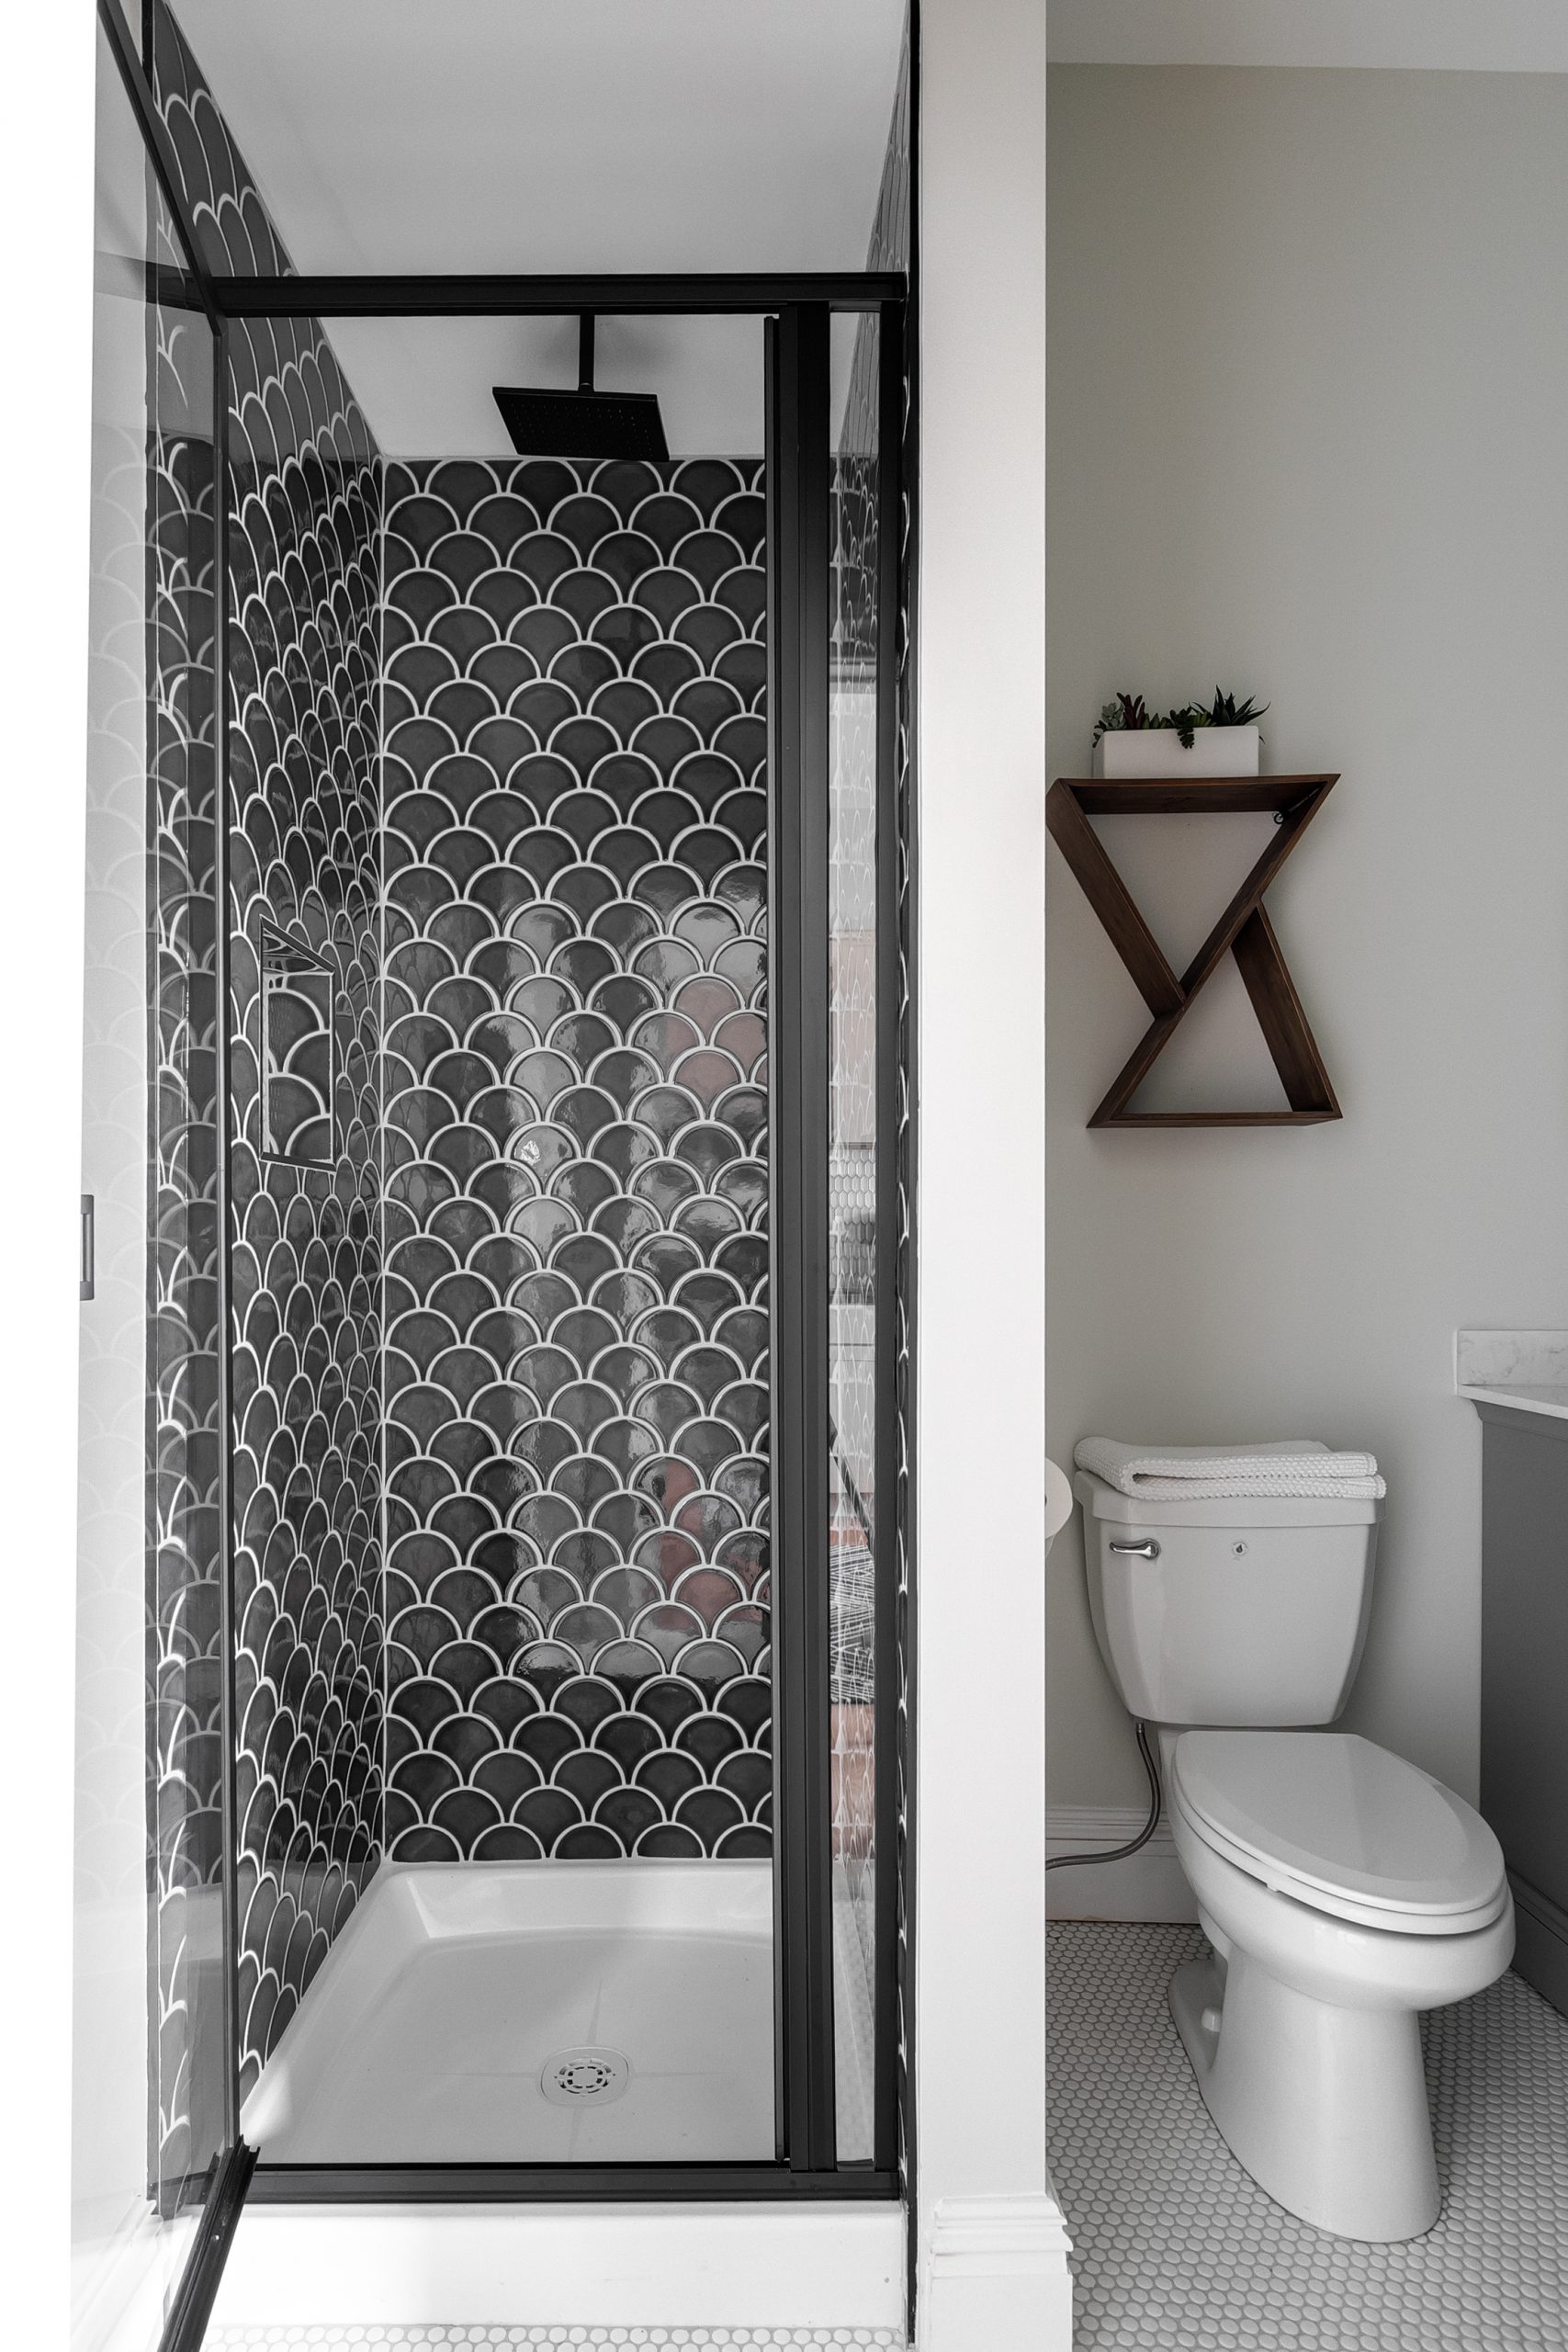 A modern shower surrounded by black "fish scale" tiling on the walls and a brushed black rainfall shower head